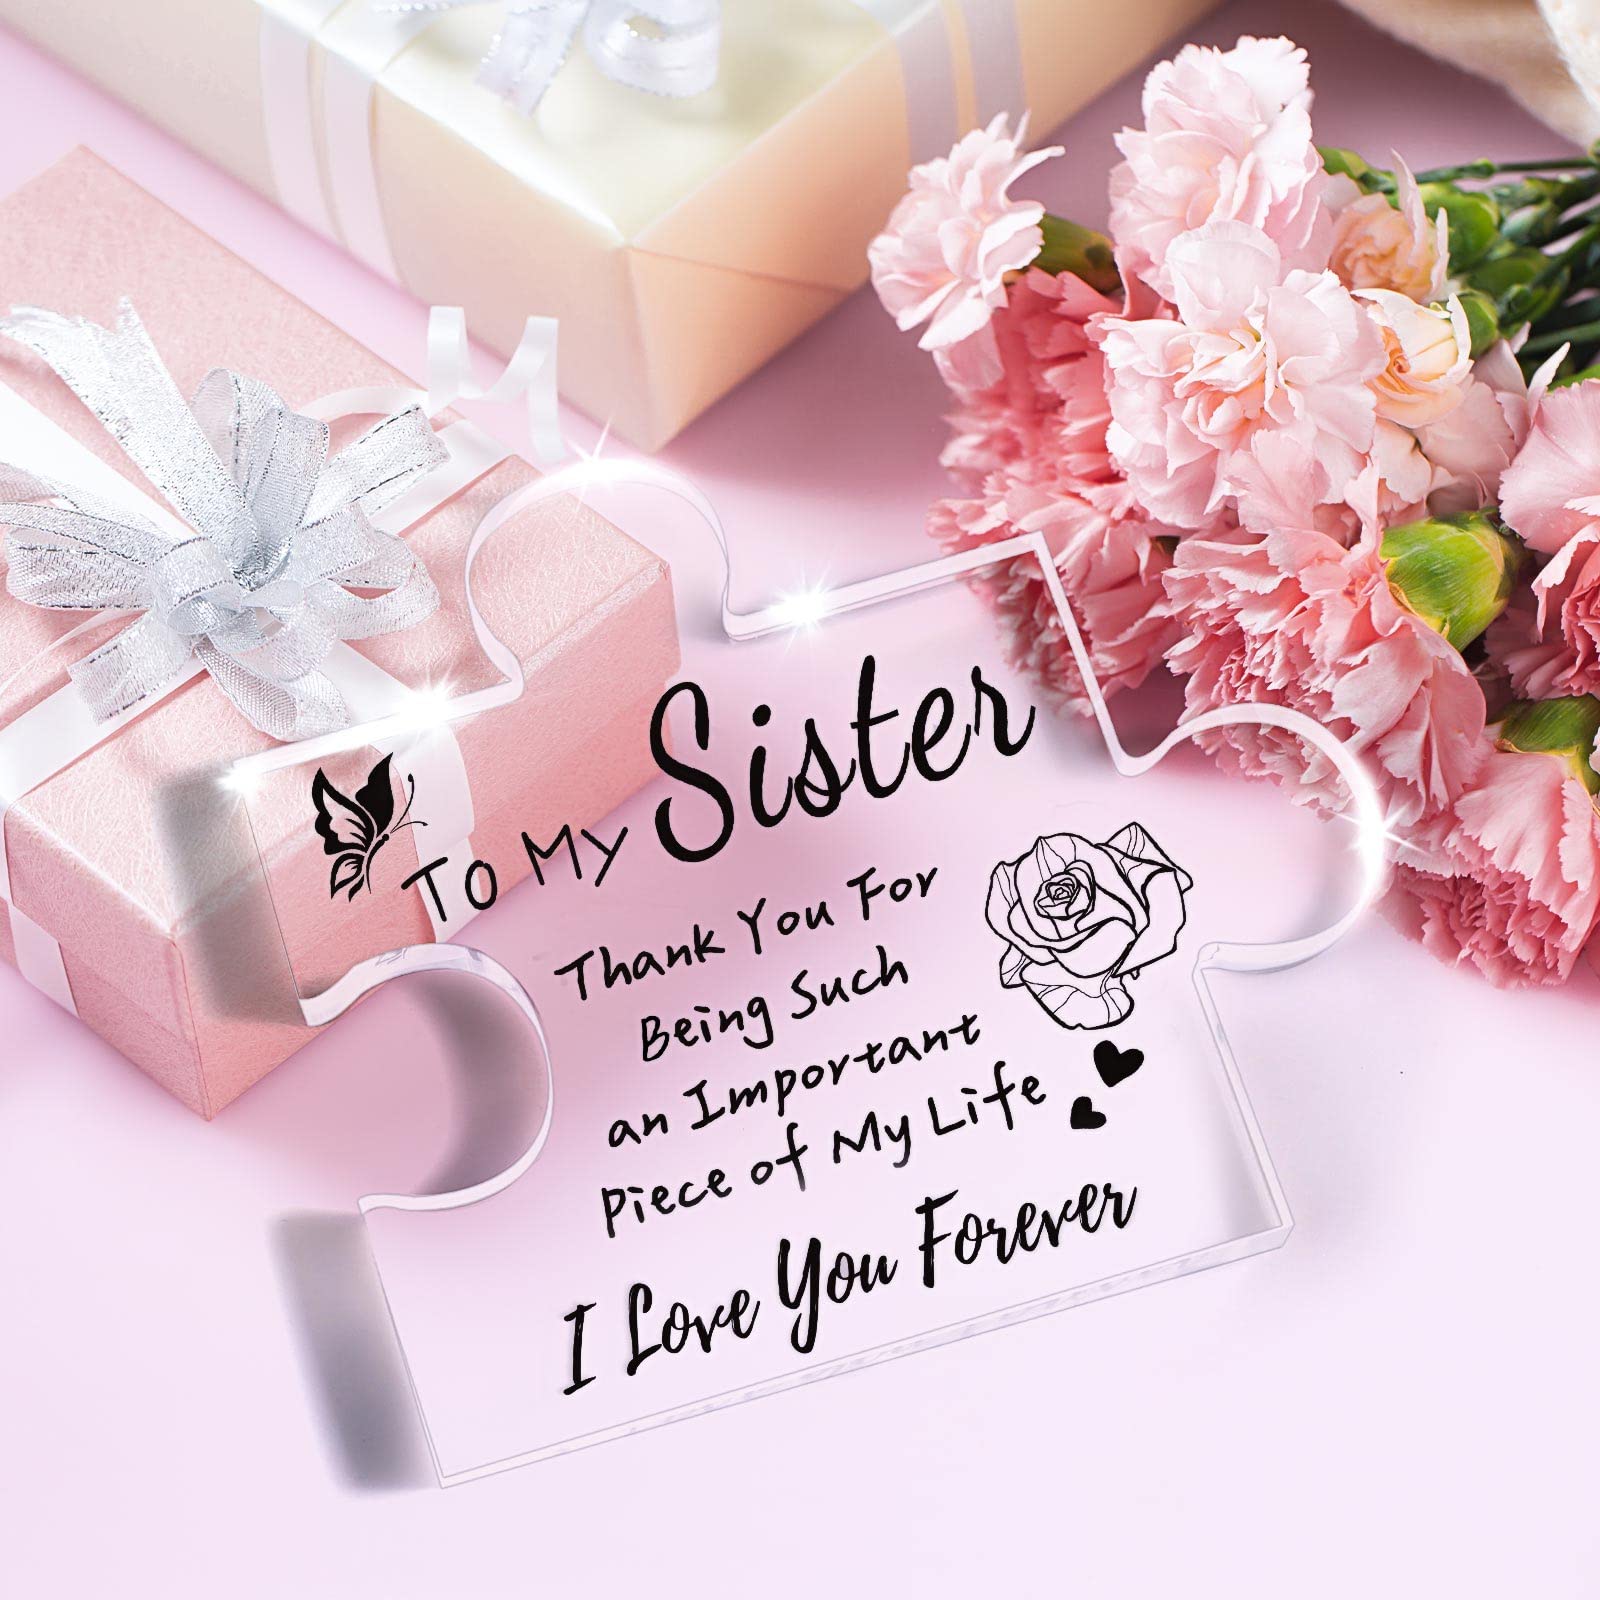 Birthday Gifts for Sister - Engraved Acrylic Block Puzzle Sister